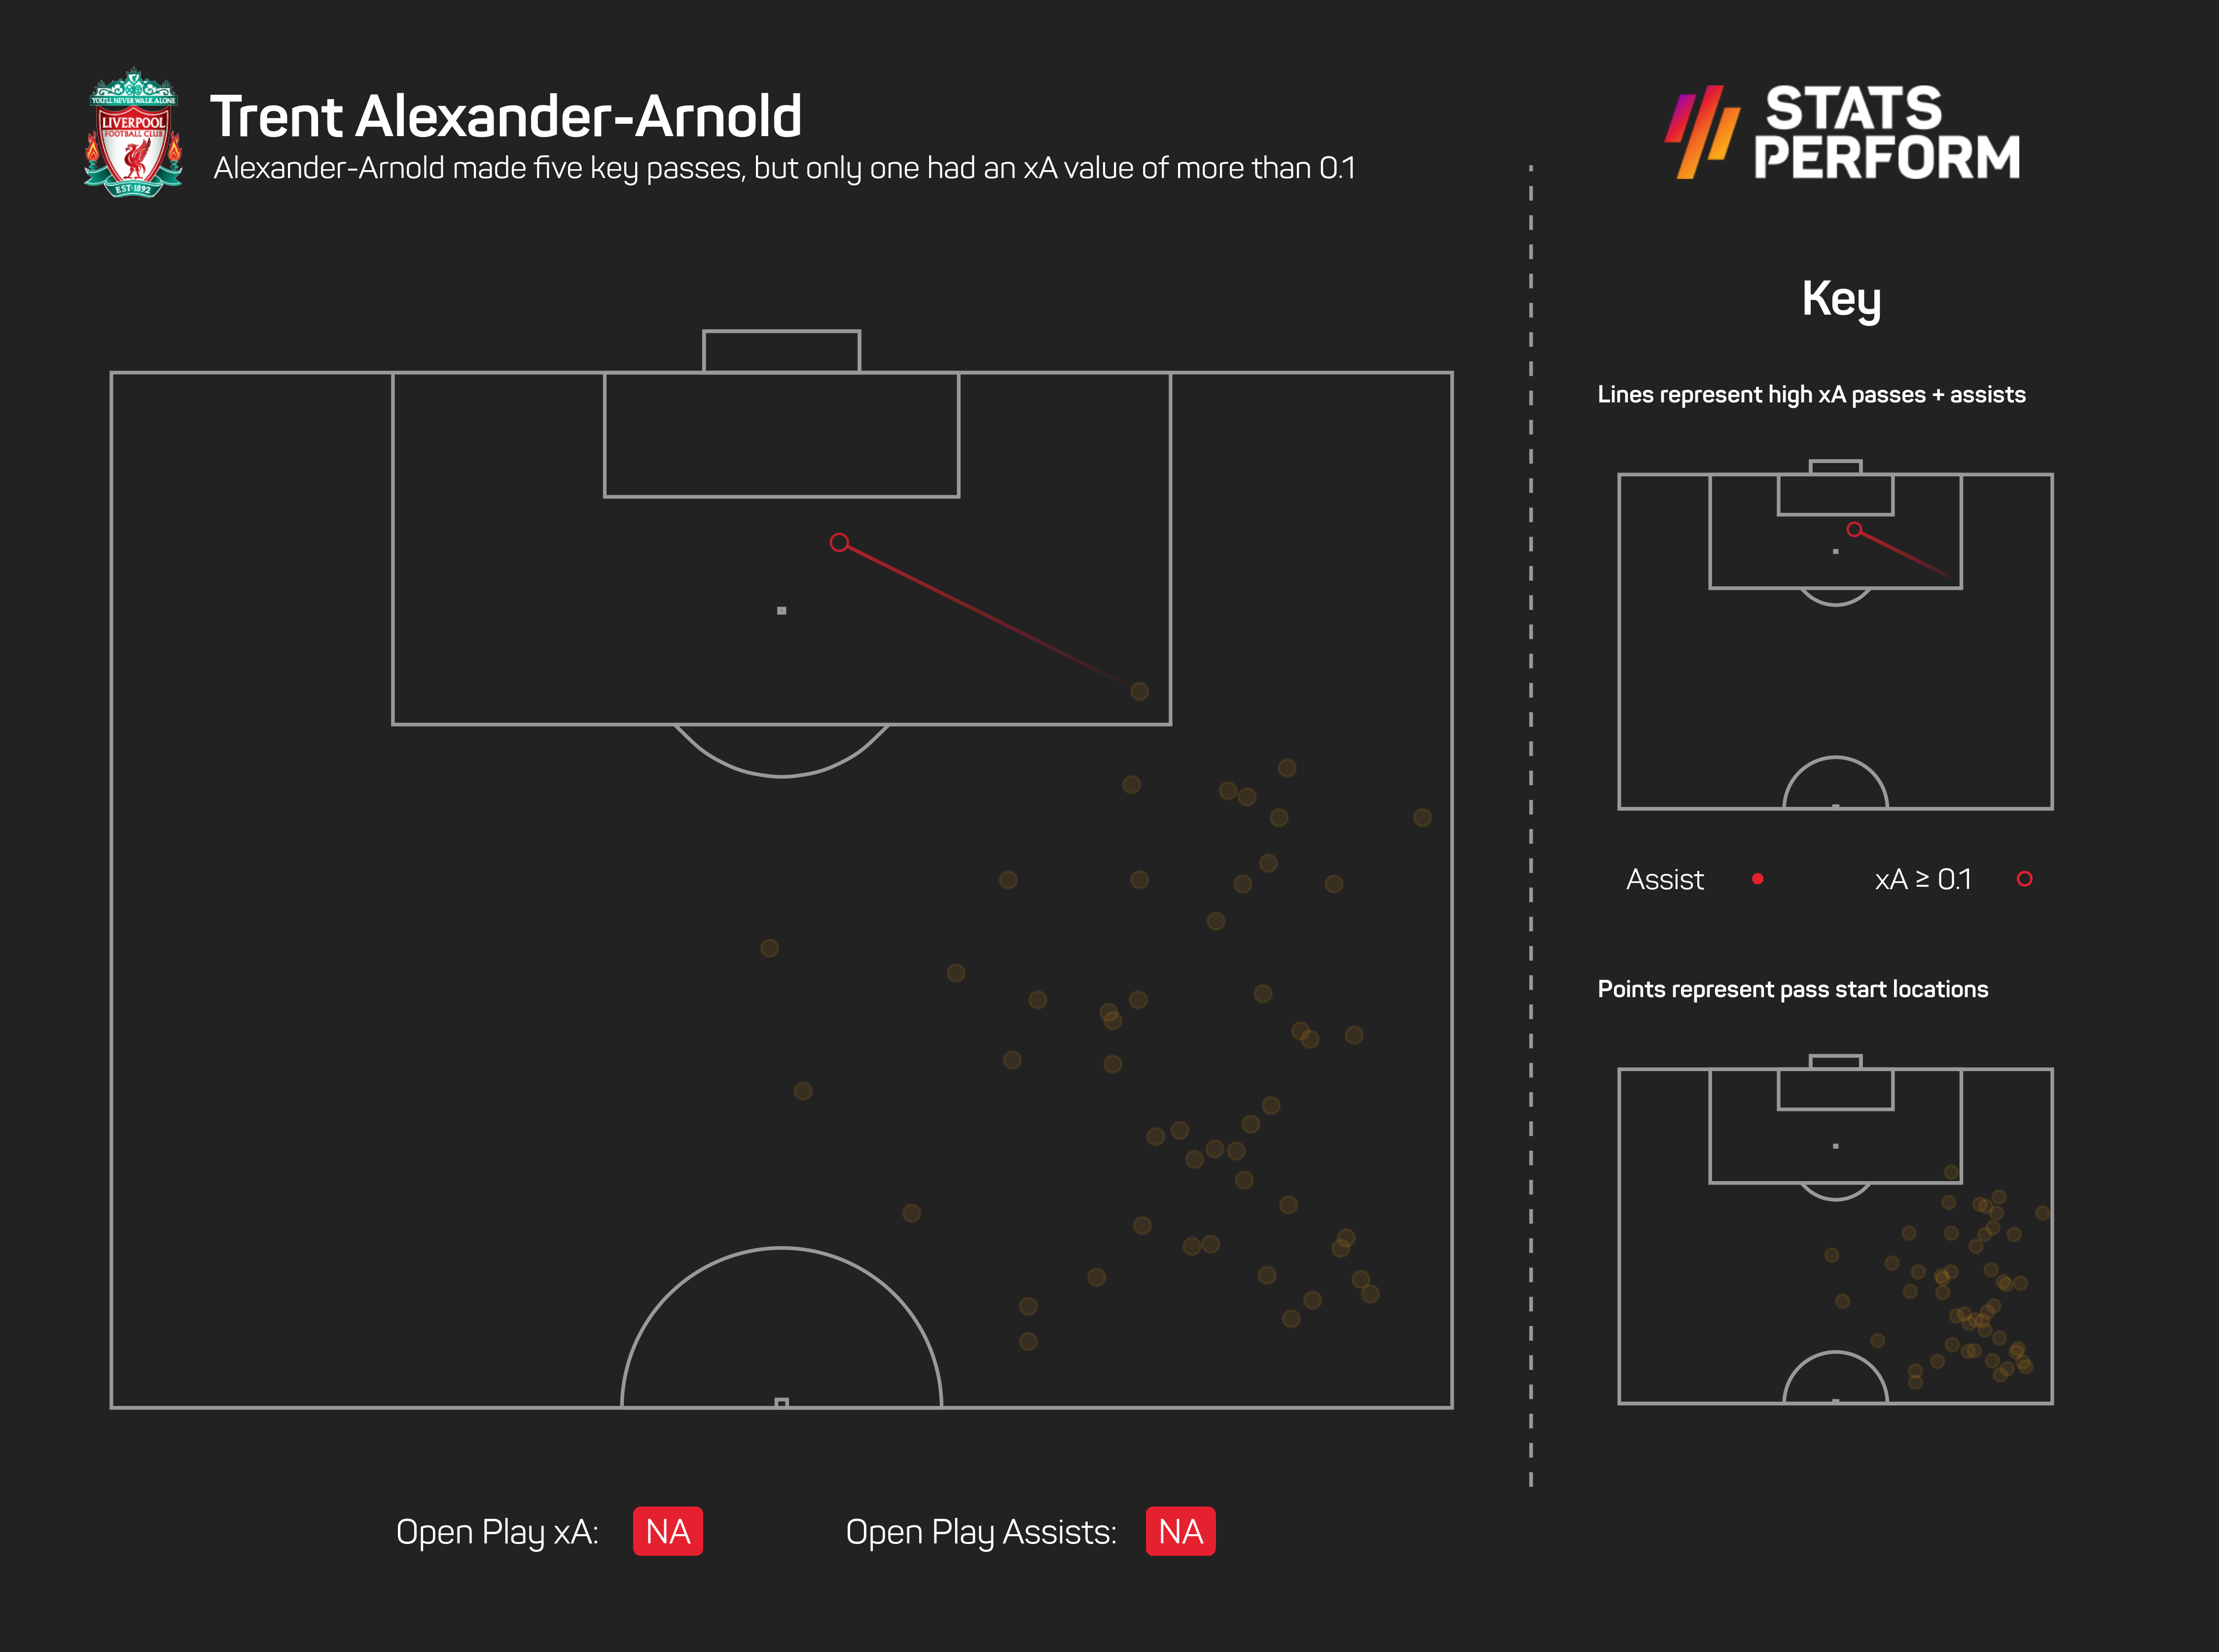 Alexander-Arnold made five key passes, but only one had an xA value of more than 0.1